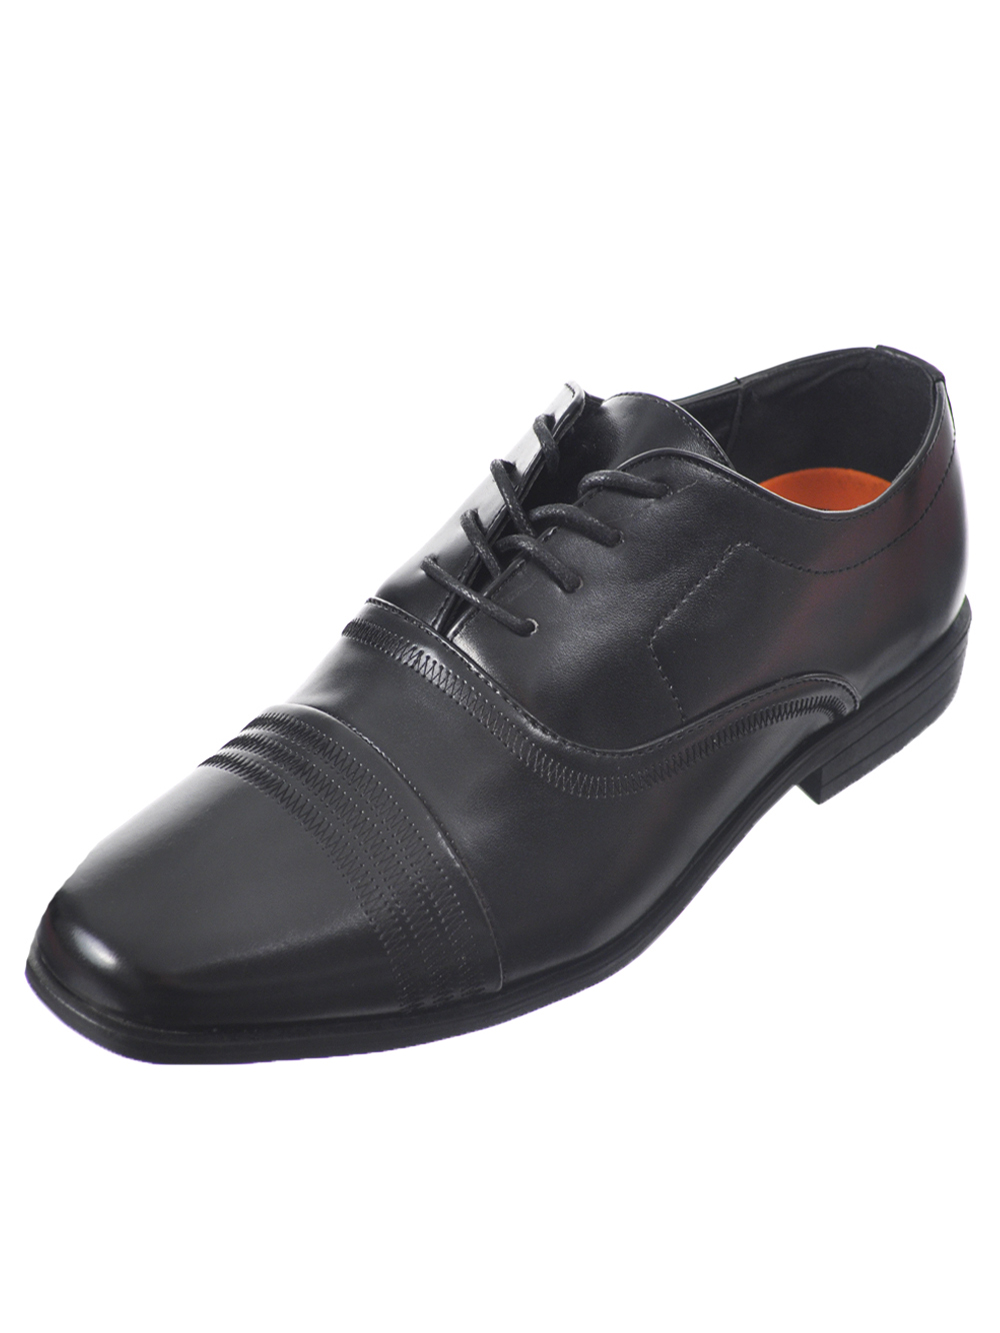 Size 8 Youth Dress Shoes for Boys